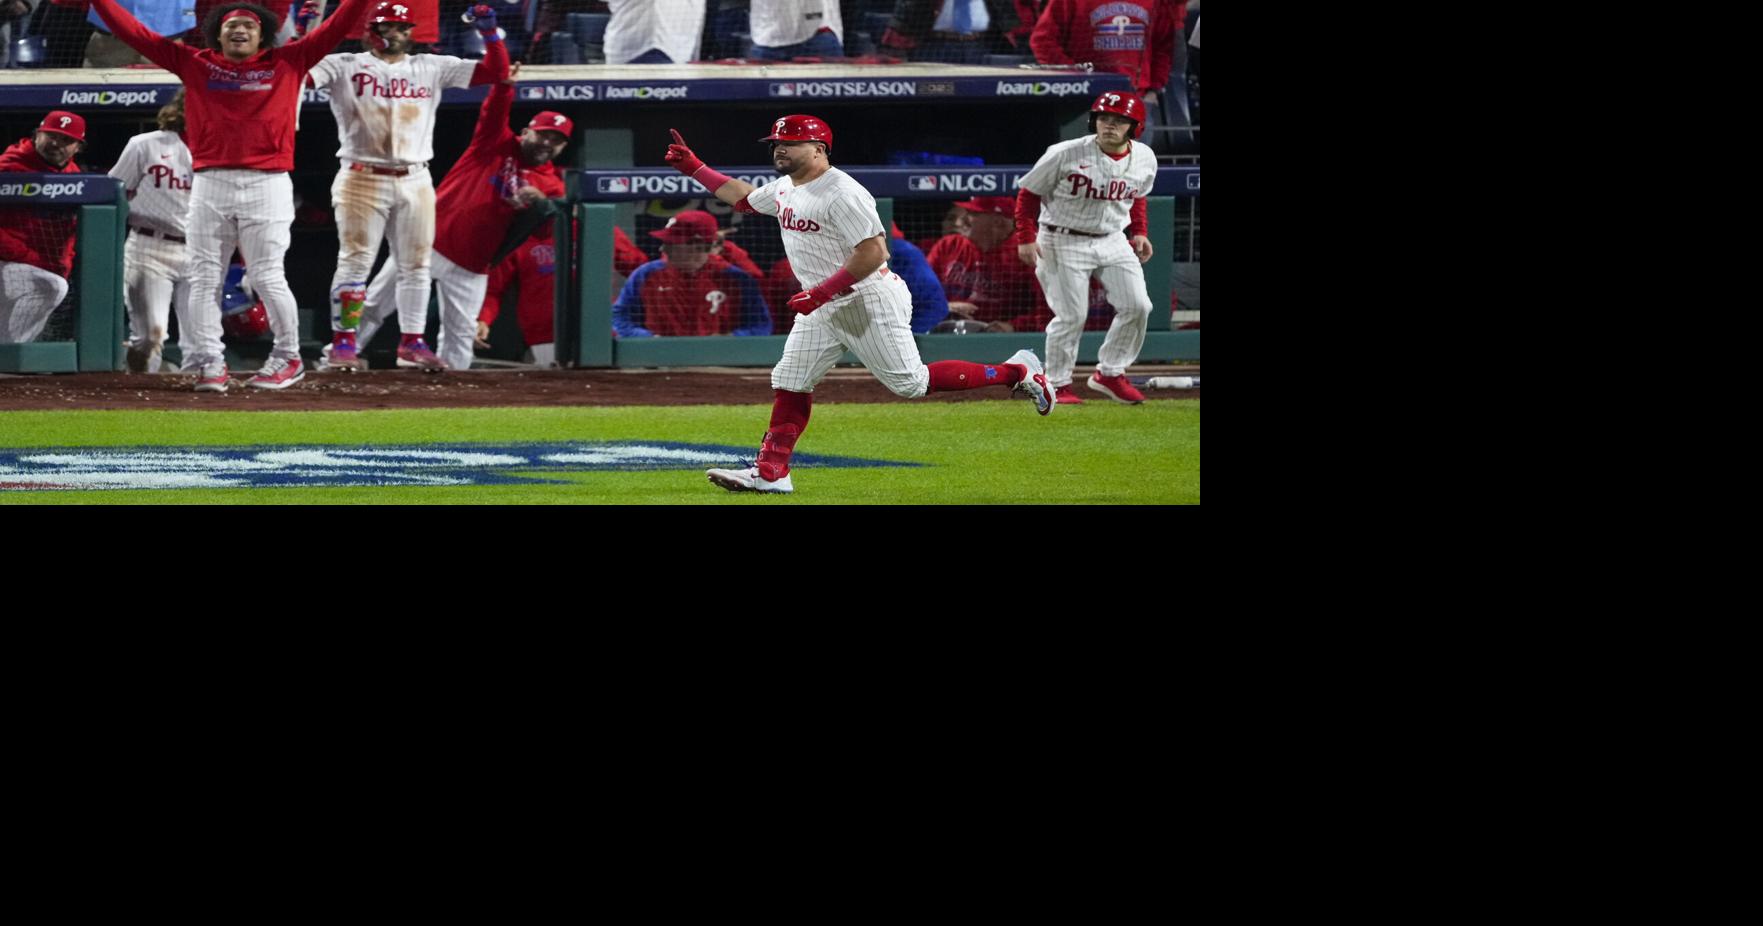 Kyle Schwarber put a baseball into orbit in Game 1 of the NLCS